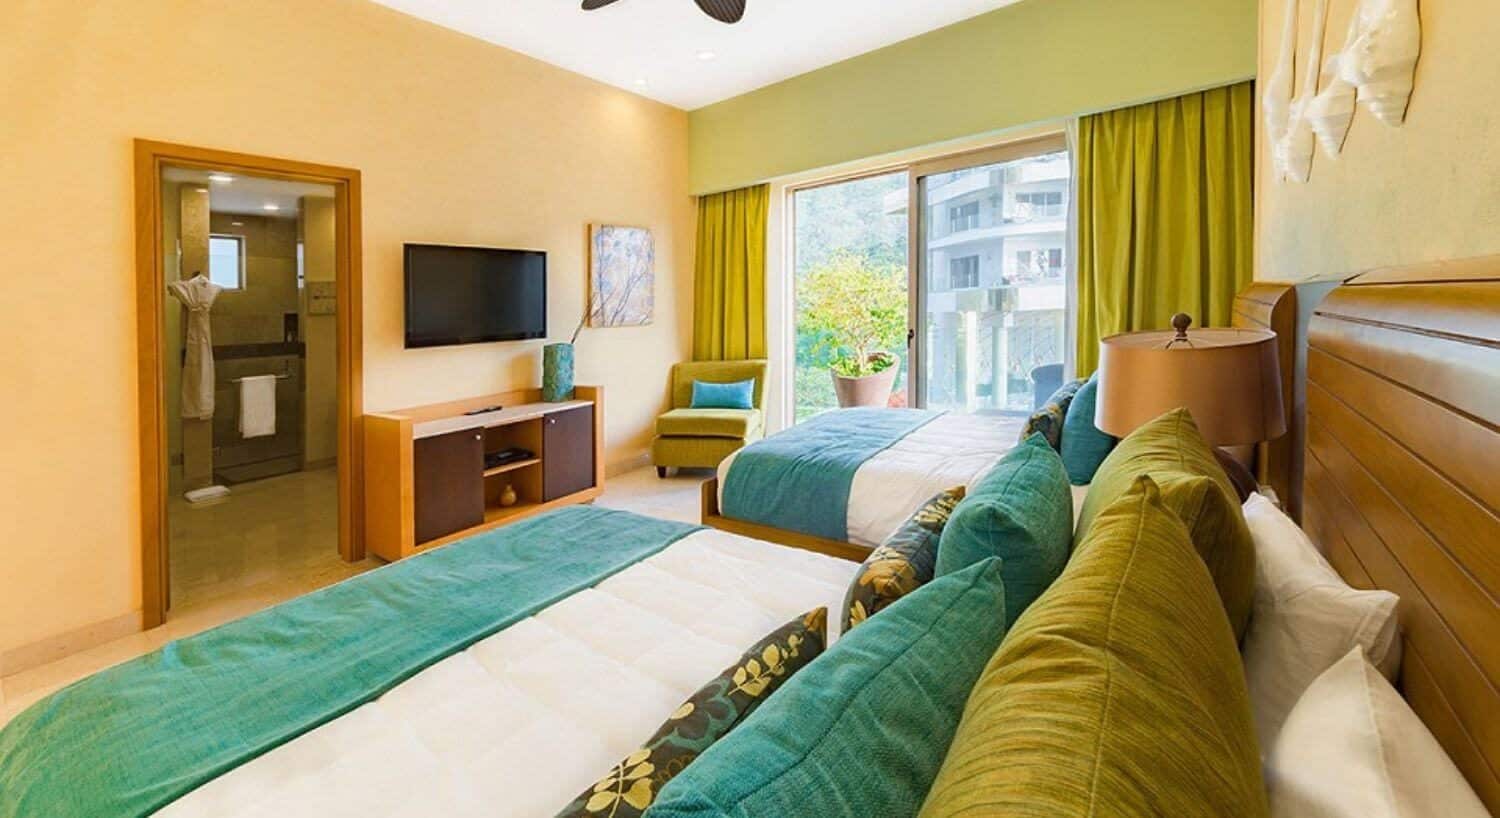 A bedroom with 2 queen beds with white and green bedding, a dresser and flat screen TV, a plush green chair in the corner, sliding doors that lead out to a private patio, and a bathroom with a shower and bathrobe hanging next to the shower.